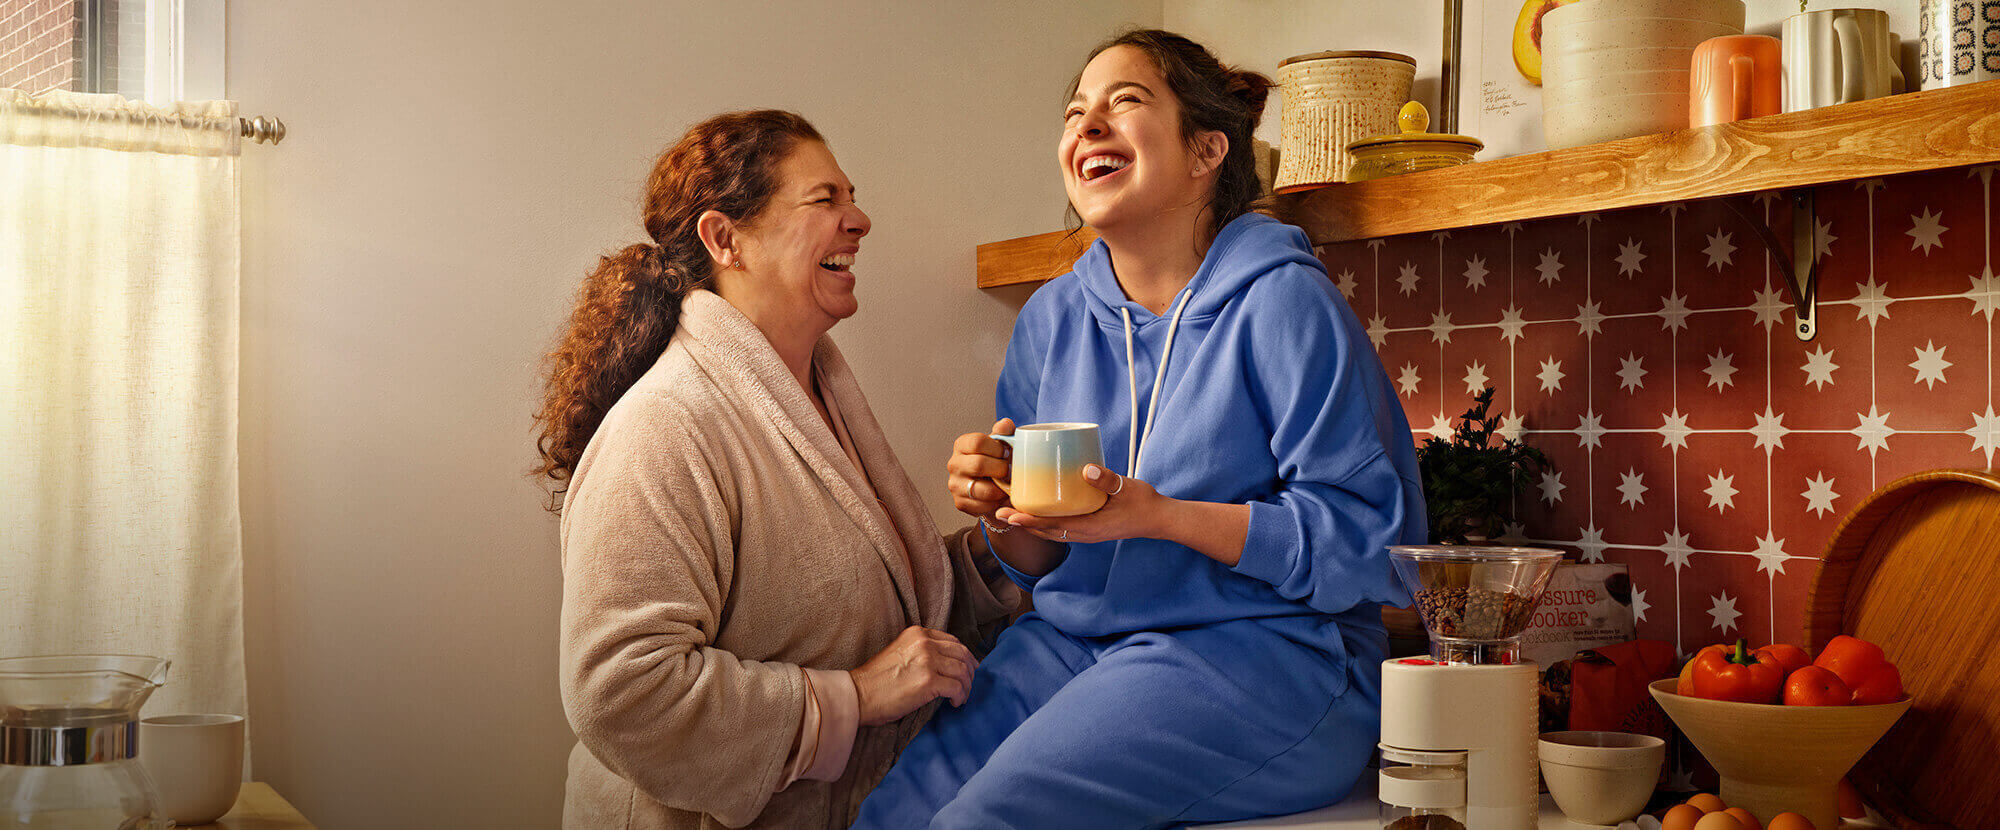 Image of a mother and young adult daughter laughing